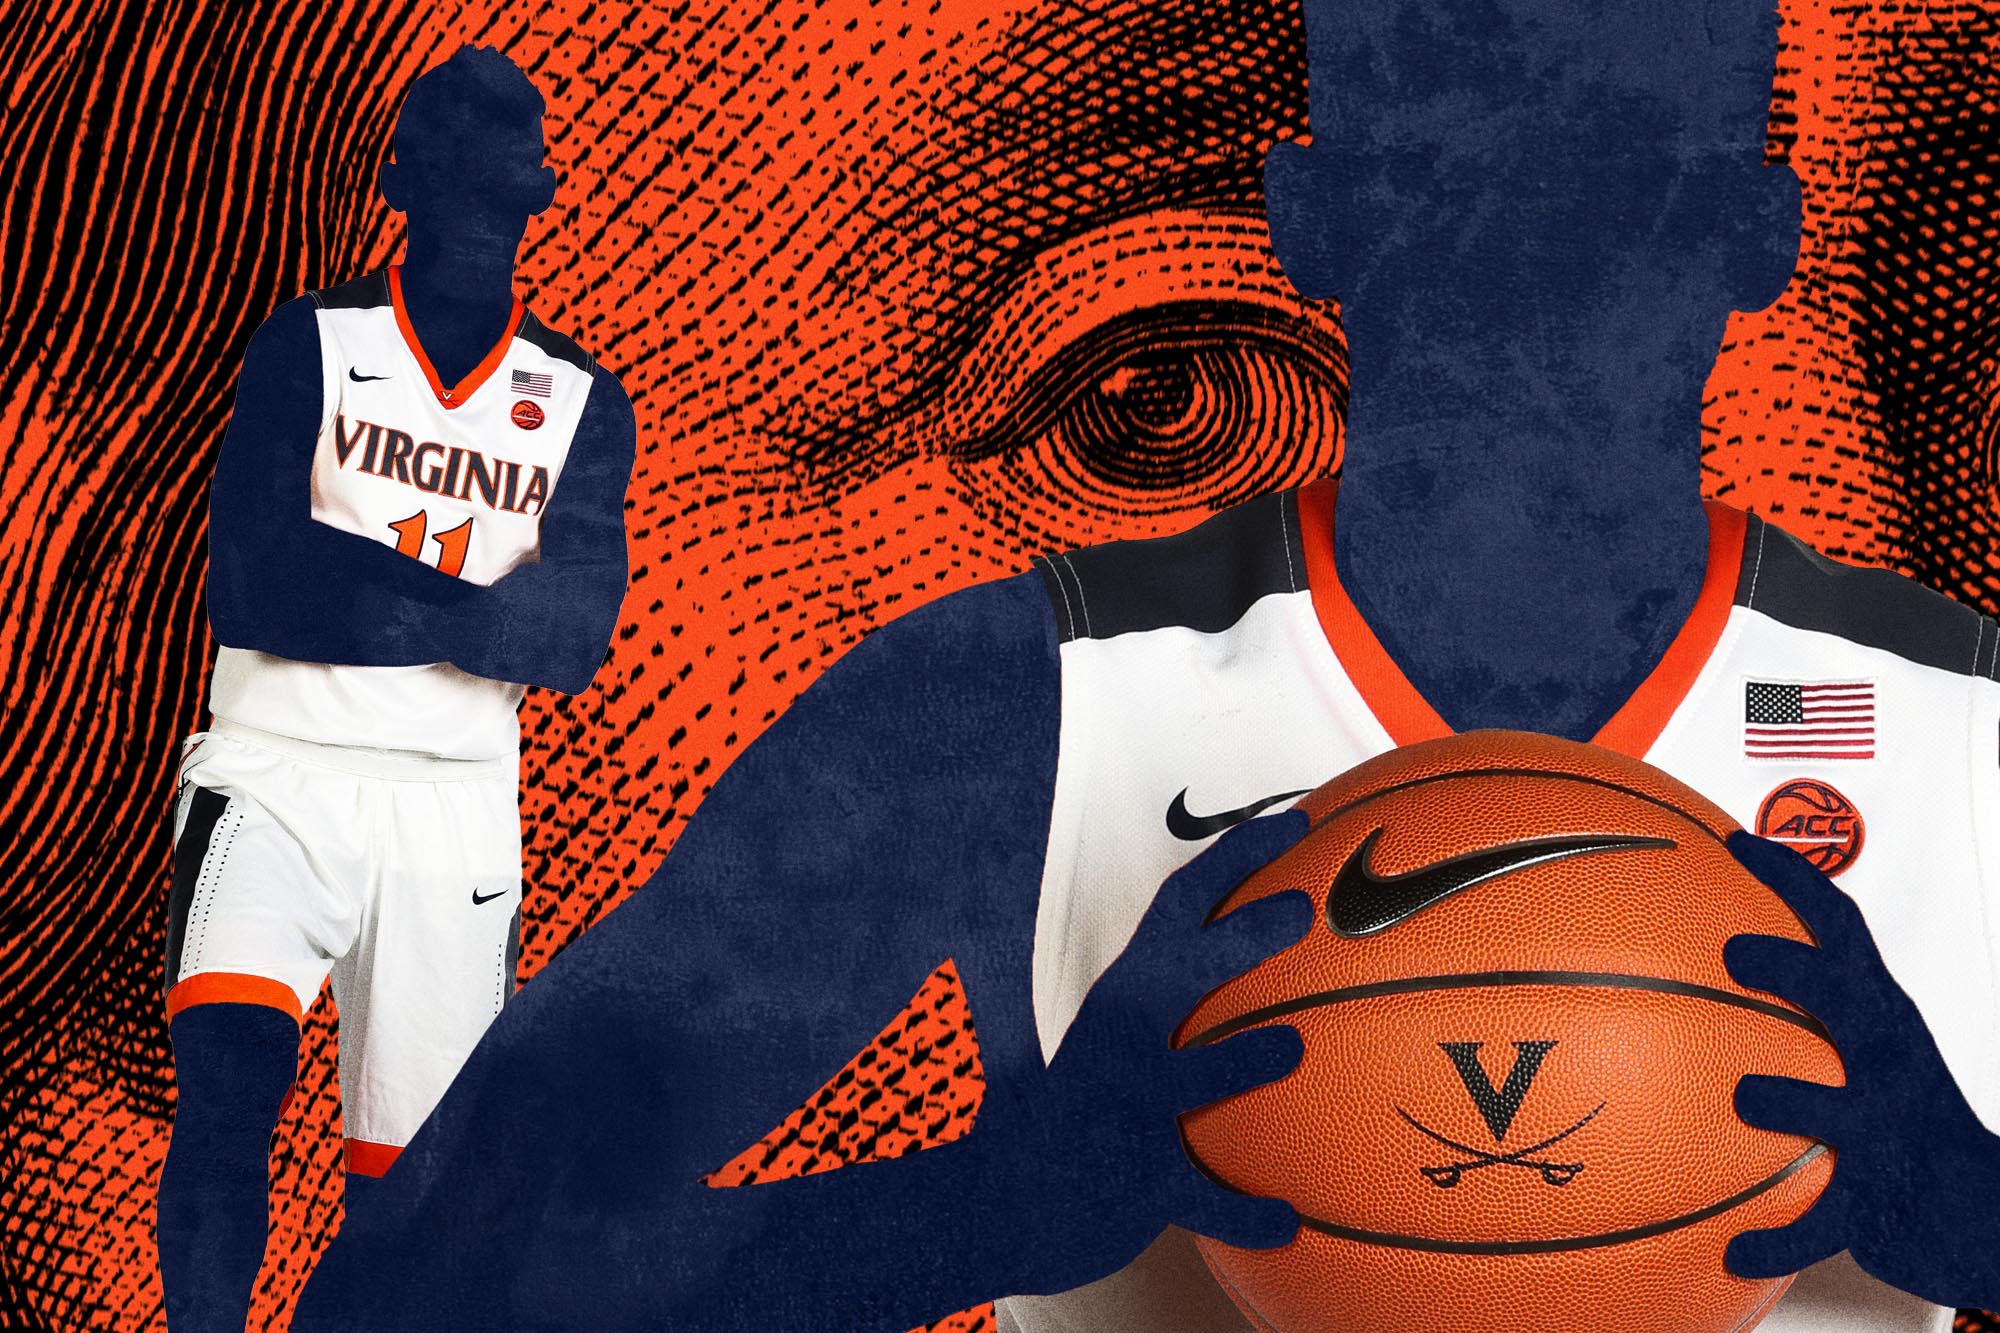 Illustration of two black silhouettes in a UVA basketball uniform one holding a basketball with both hands with the background image an up close picture of Benjamin Franklins face